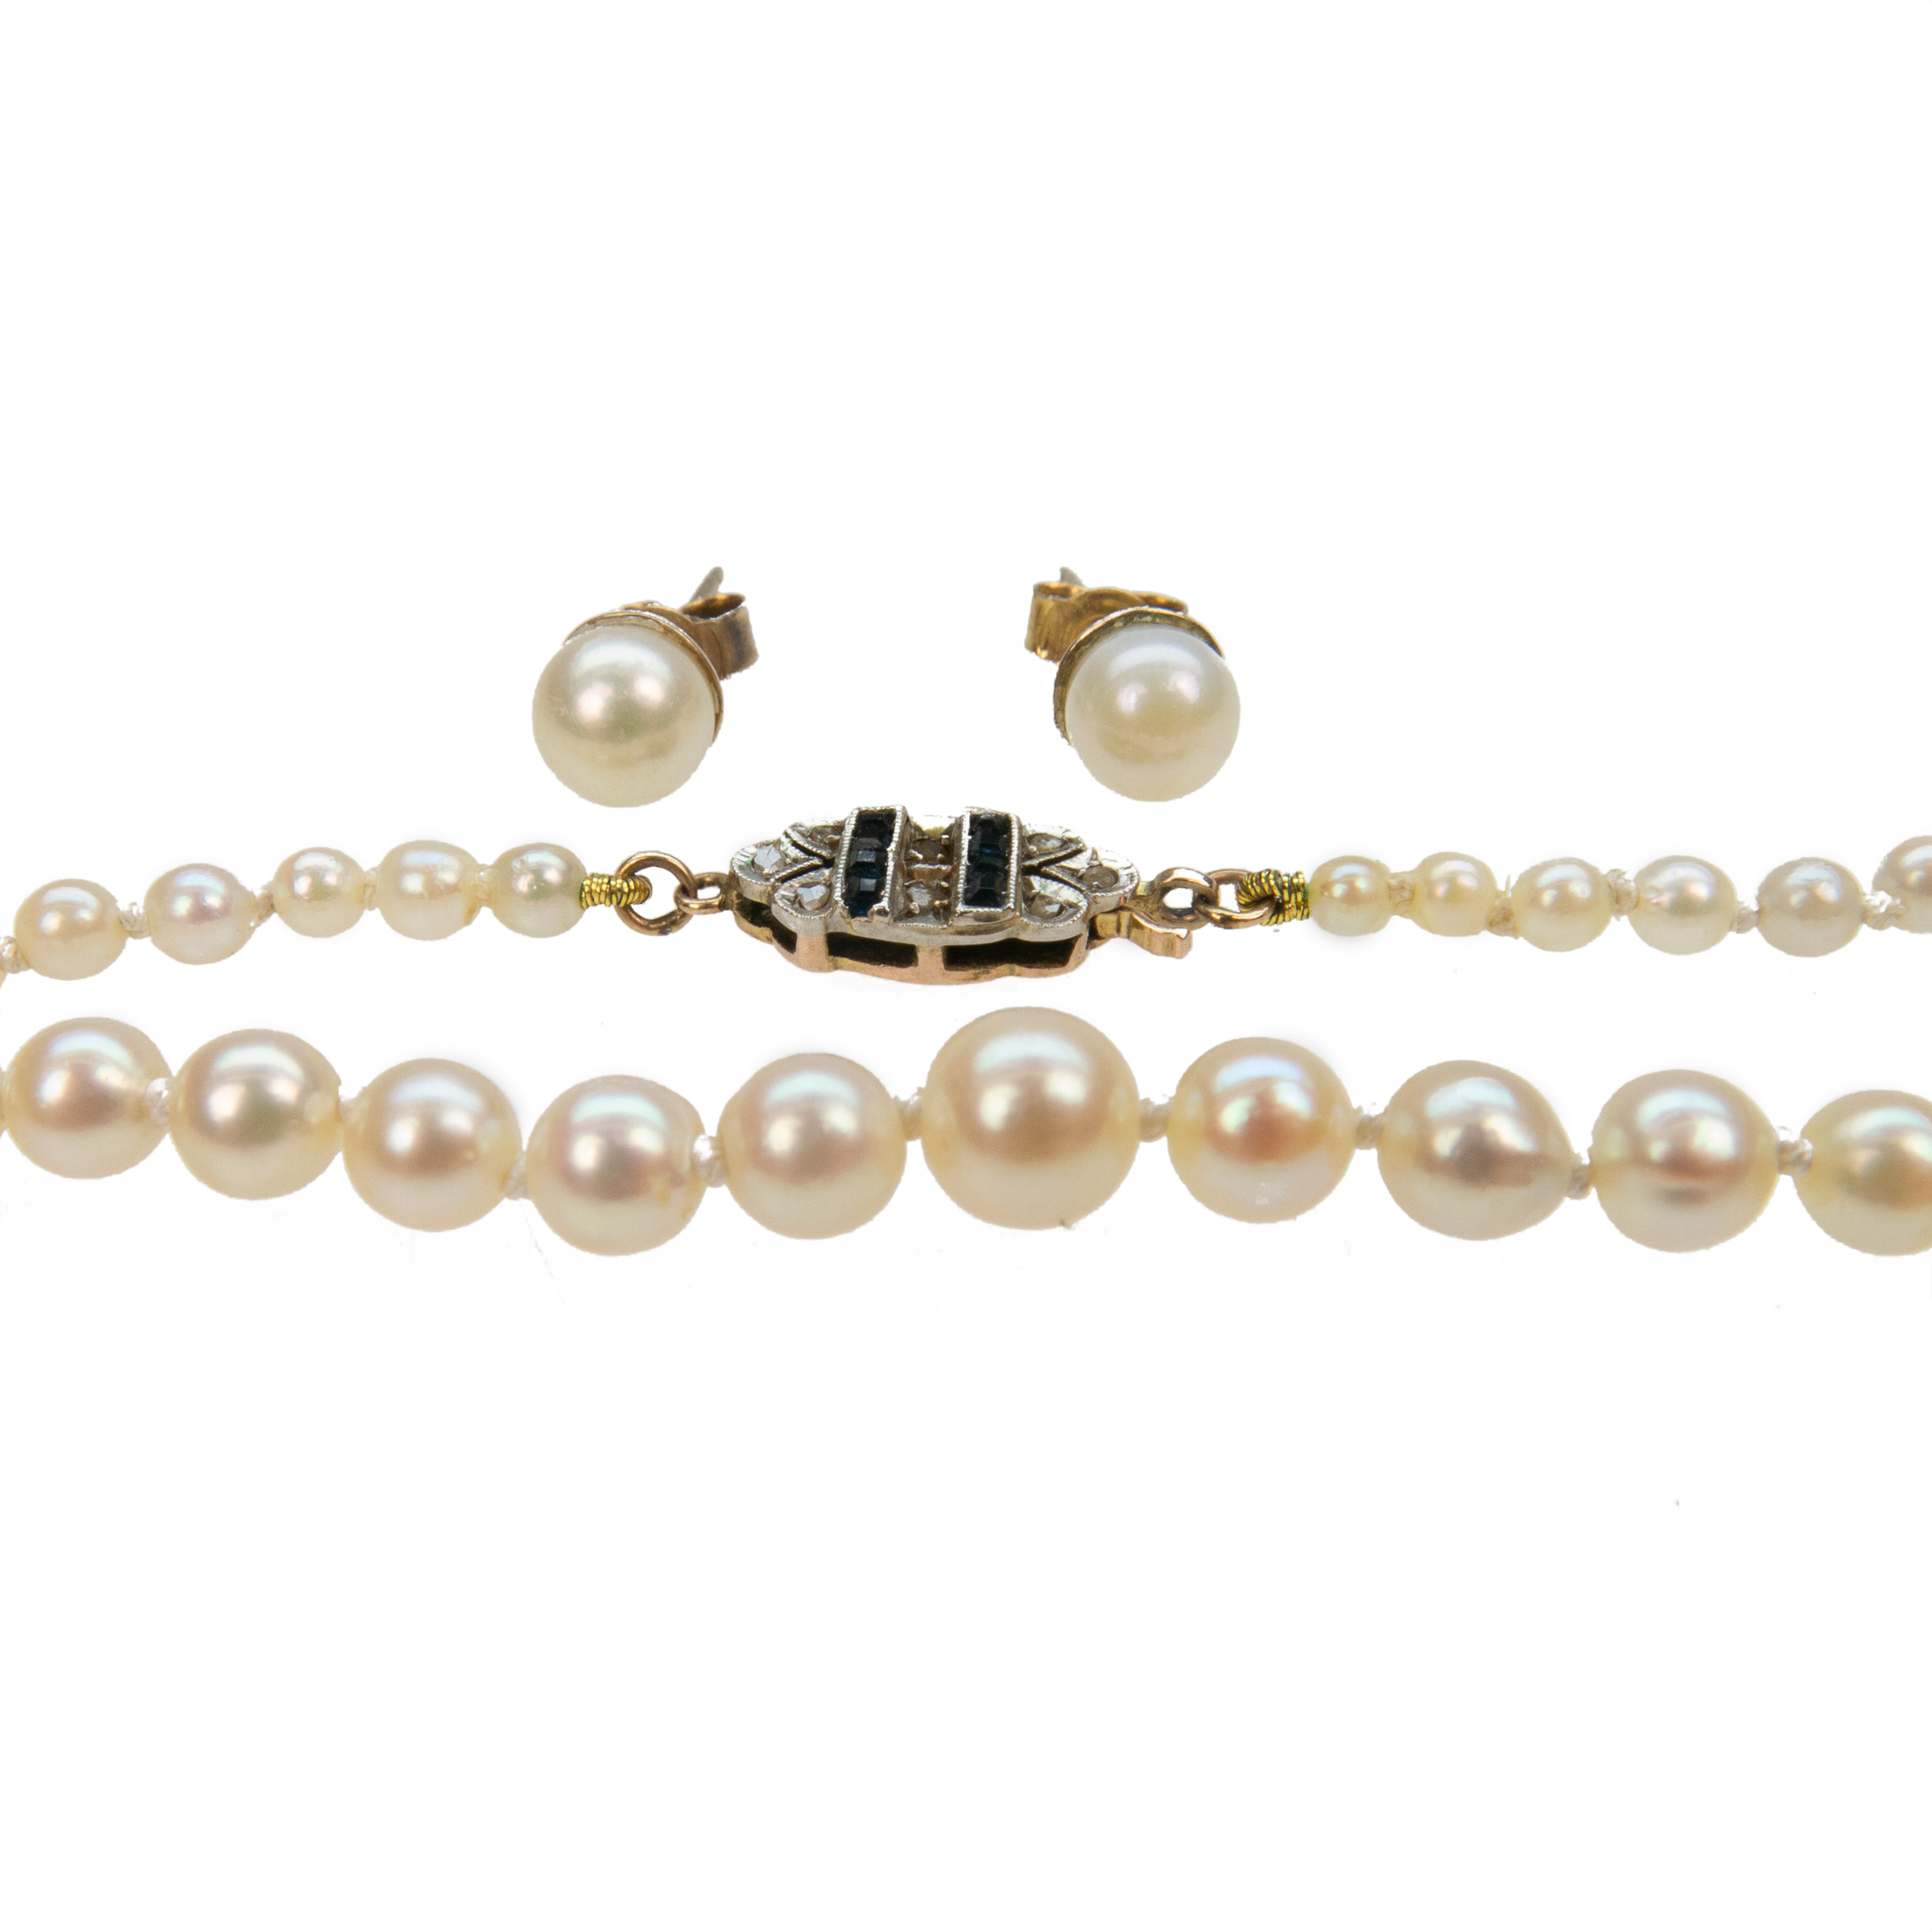 Single Strand Of Graduated Cultured Pearls